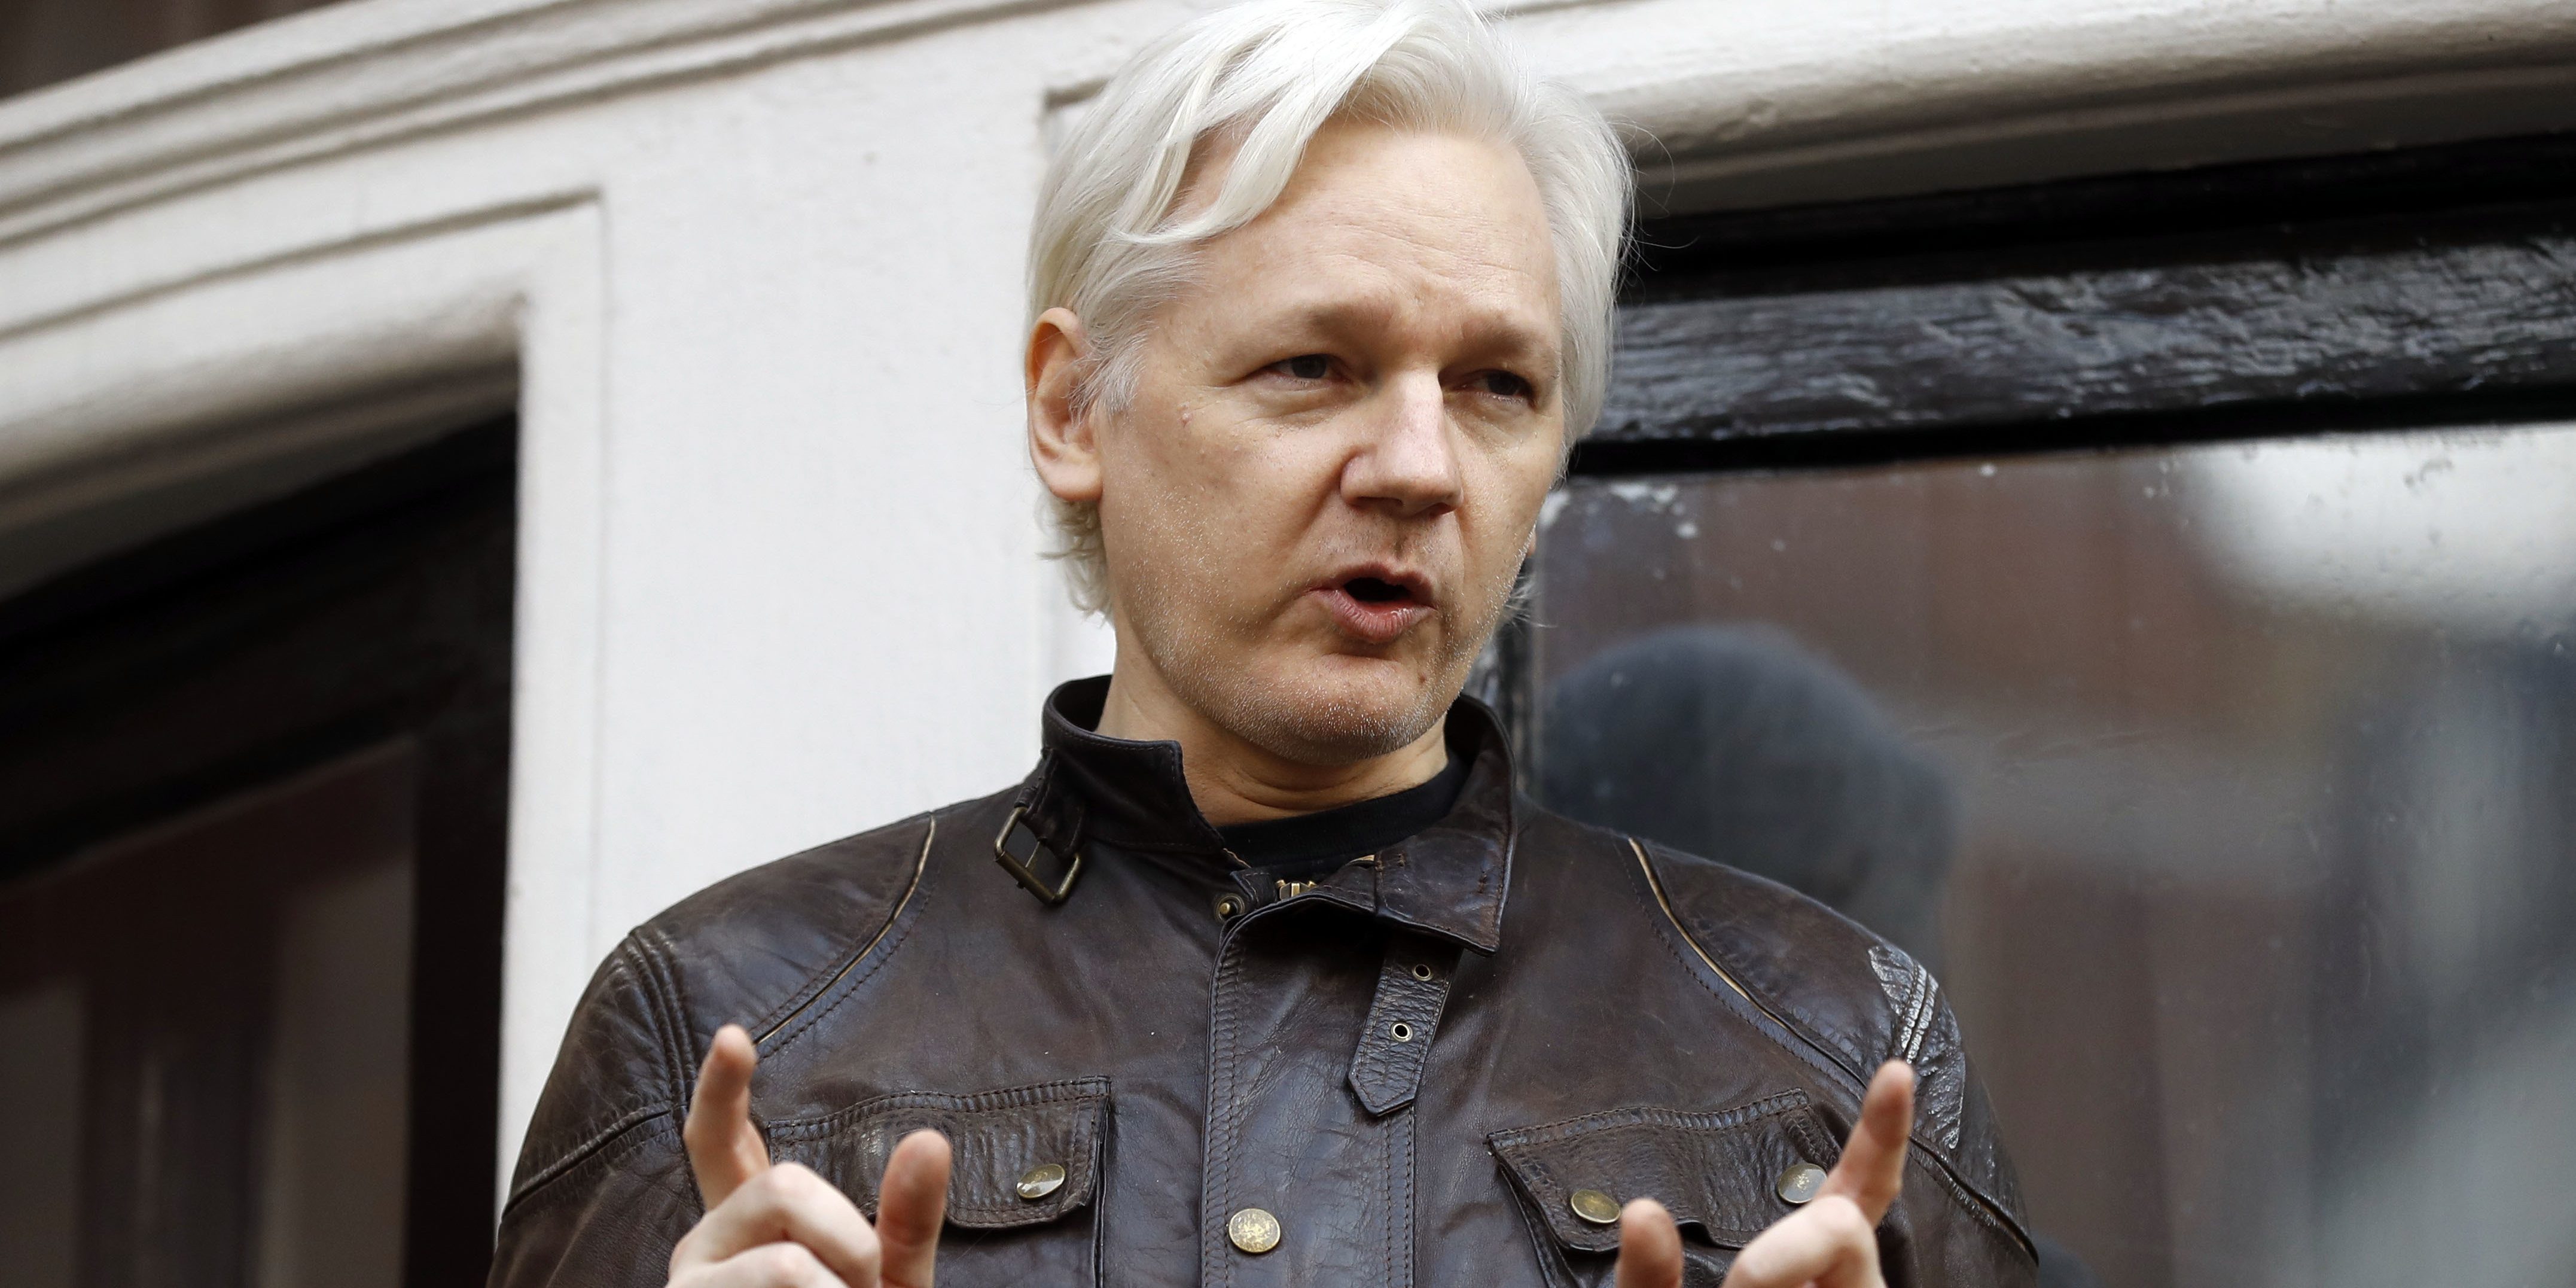 Julian Assange speaks to the media outside the Ecuadorian embassy in London, May 19, 2017.